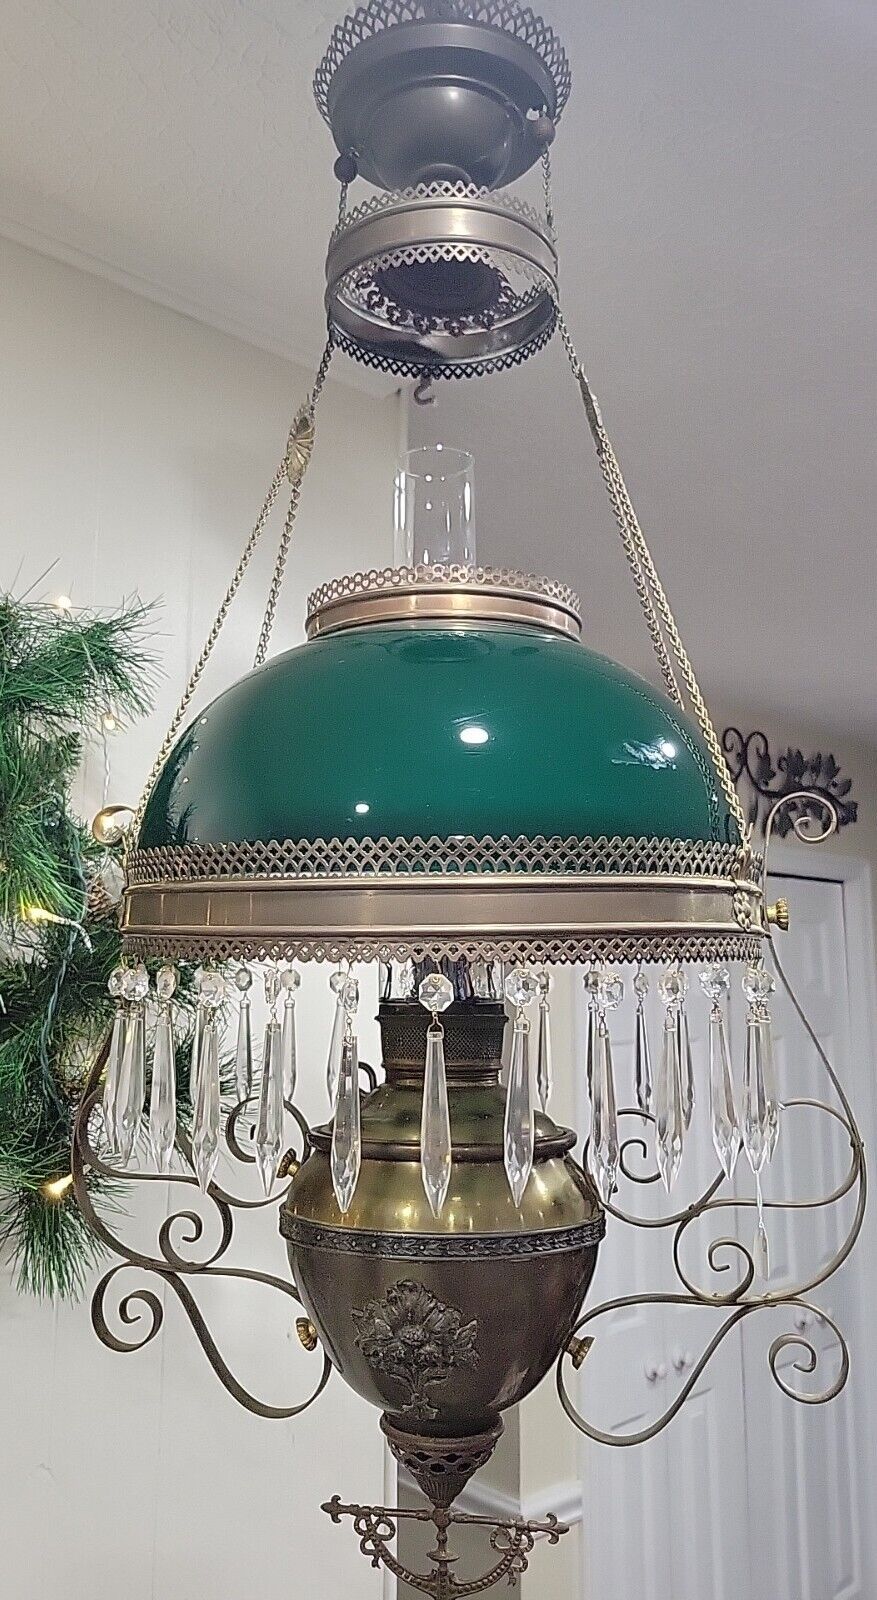 ANTIQUE MILLER HANGING OIL LAMP JUNO LAMP MADE IN USA GREEN  GLASS SHADE ORNATE 